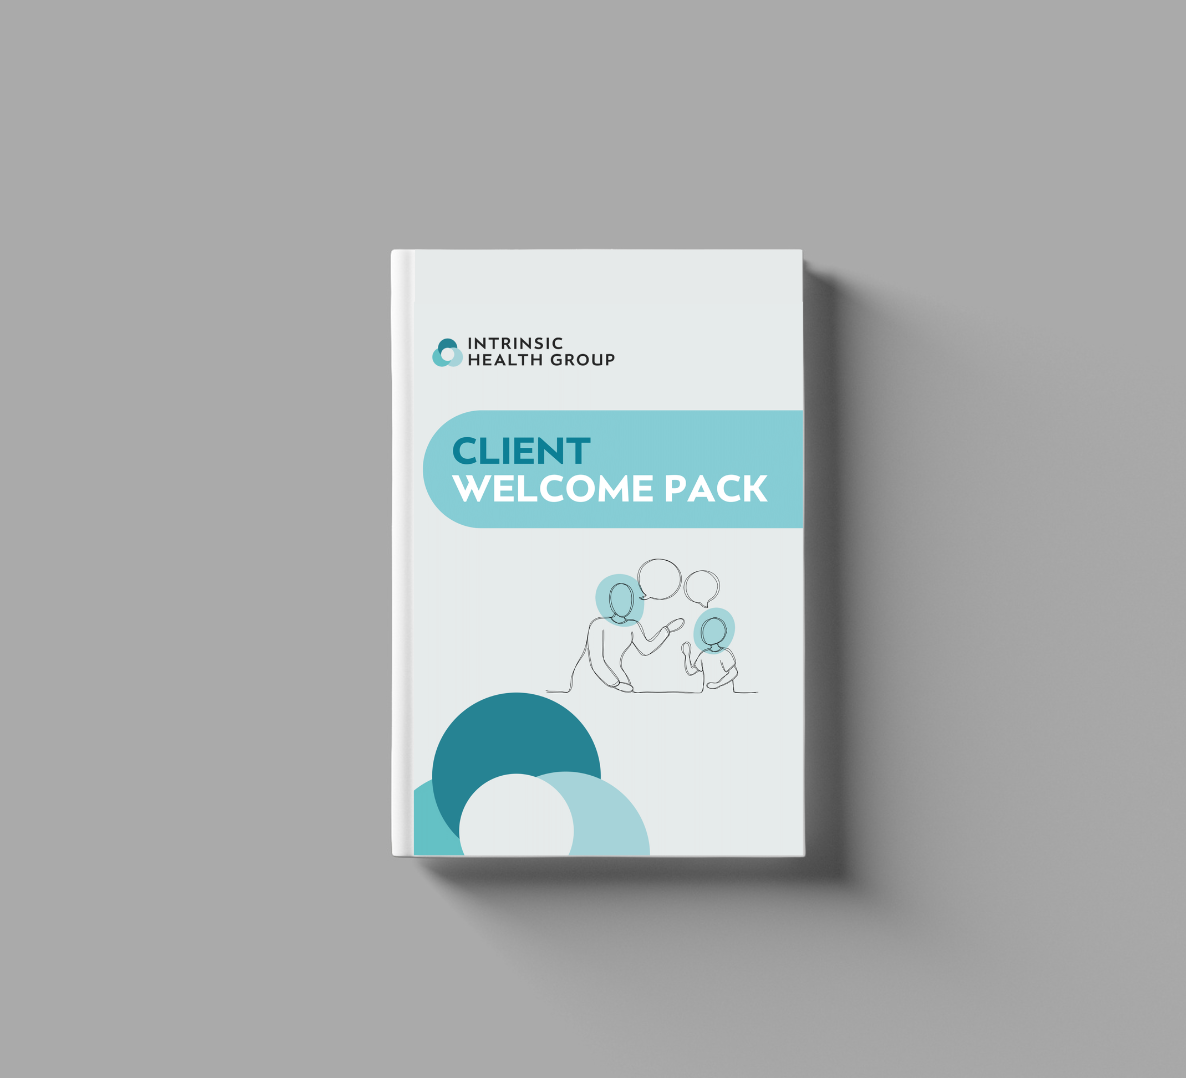  Explore our New Client Welcome Pack on this page. It serves as a comprehensive guide to introduce you to Intrinsic Health Group, detailing our range of services, what to anticipate during your experience with us, essential policies, and much more